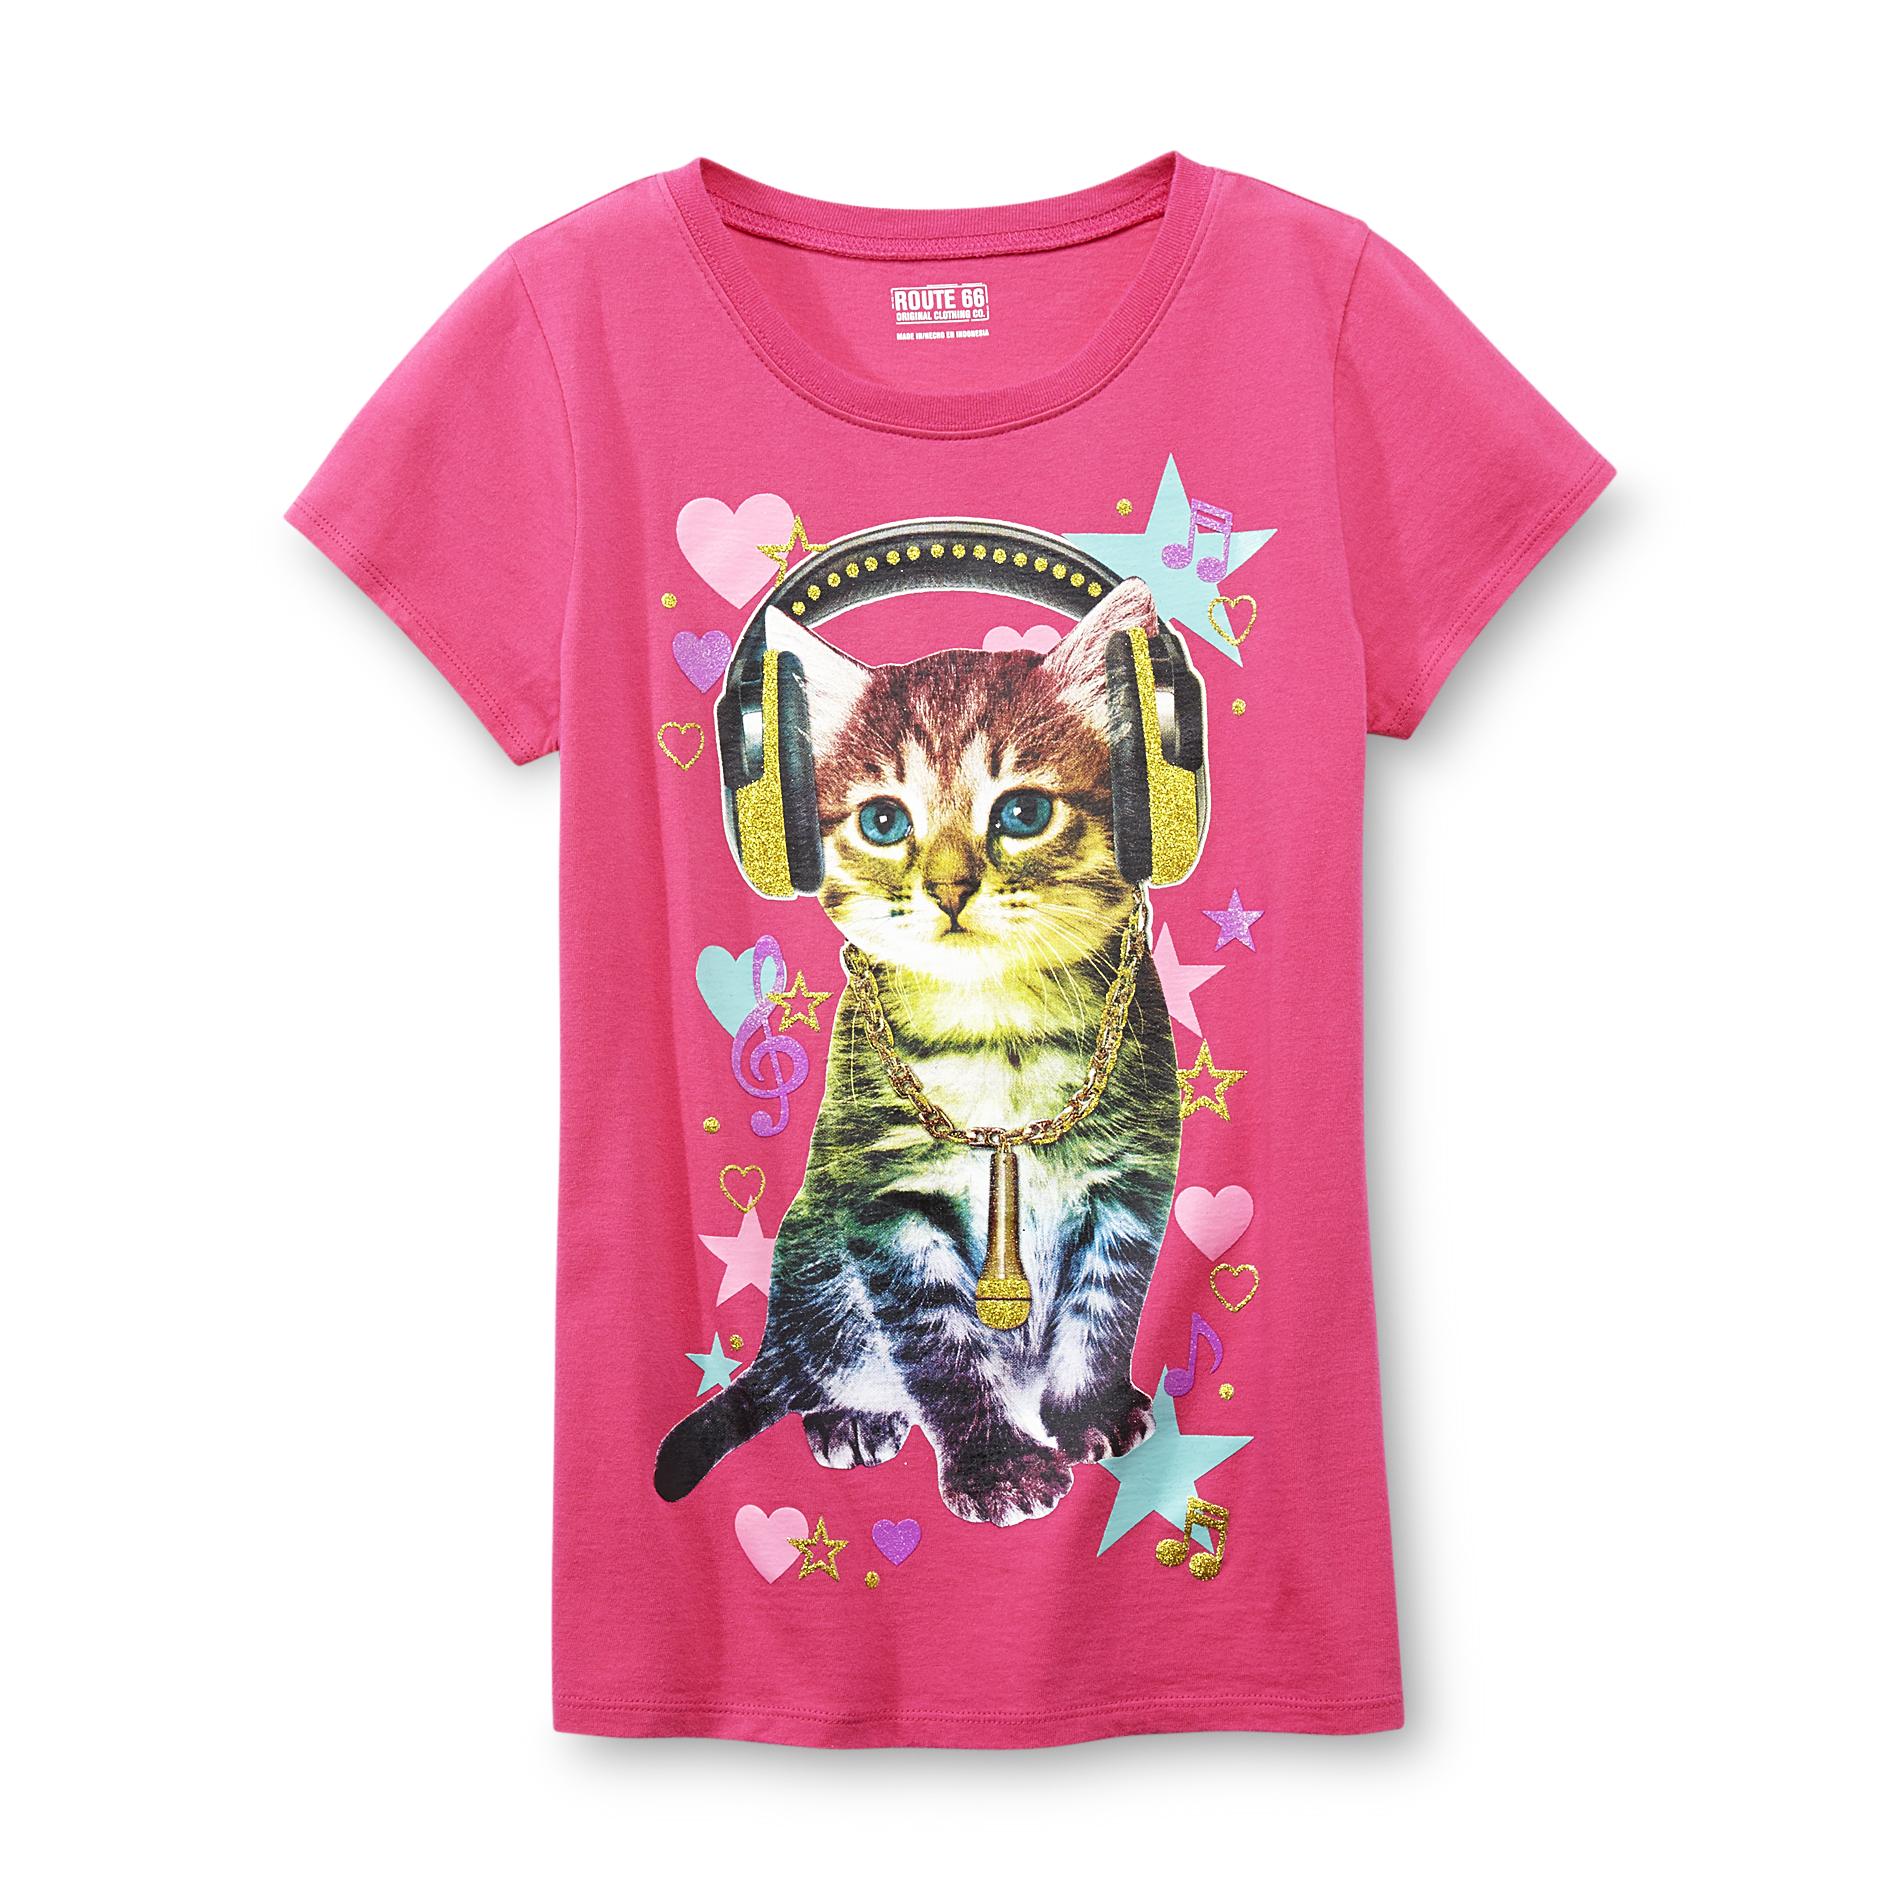 Route 66 Girl's Graphic T-Shirt - Kitty Cat